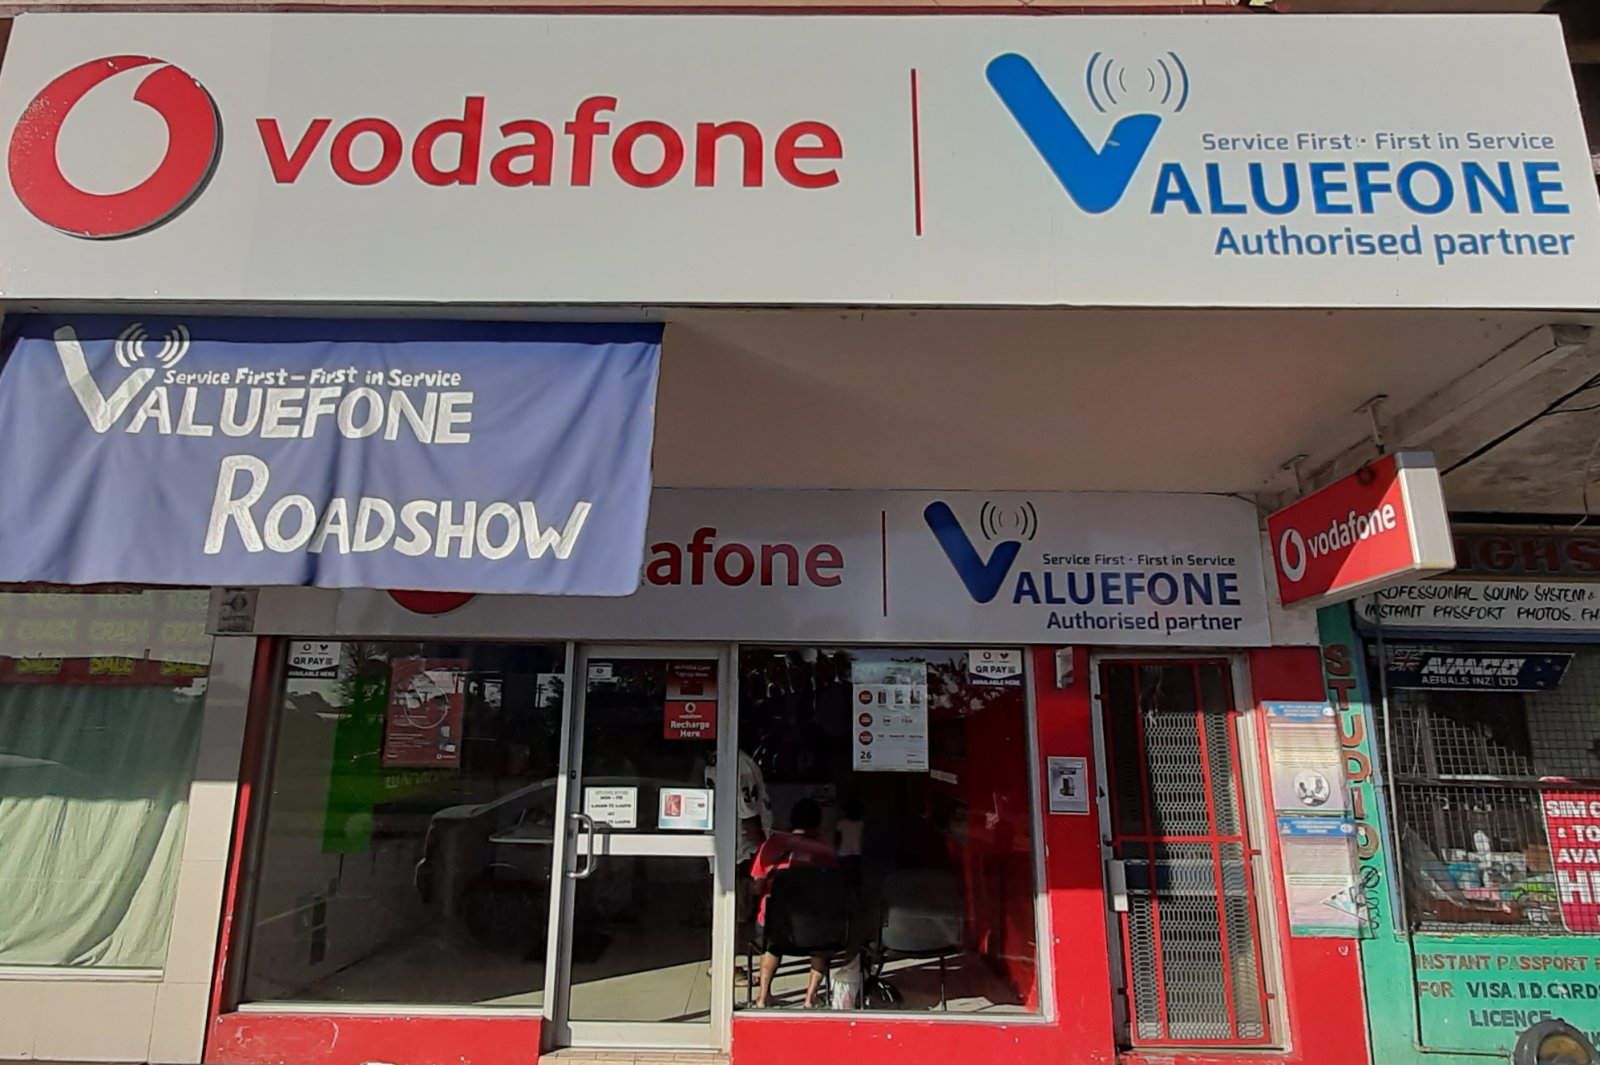 Valufone Fiji has partnered with our computer repair shop software